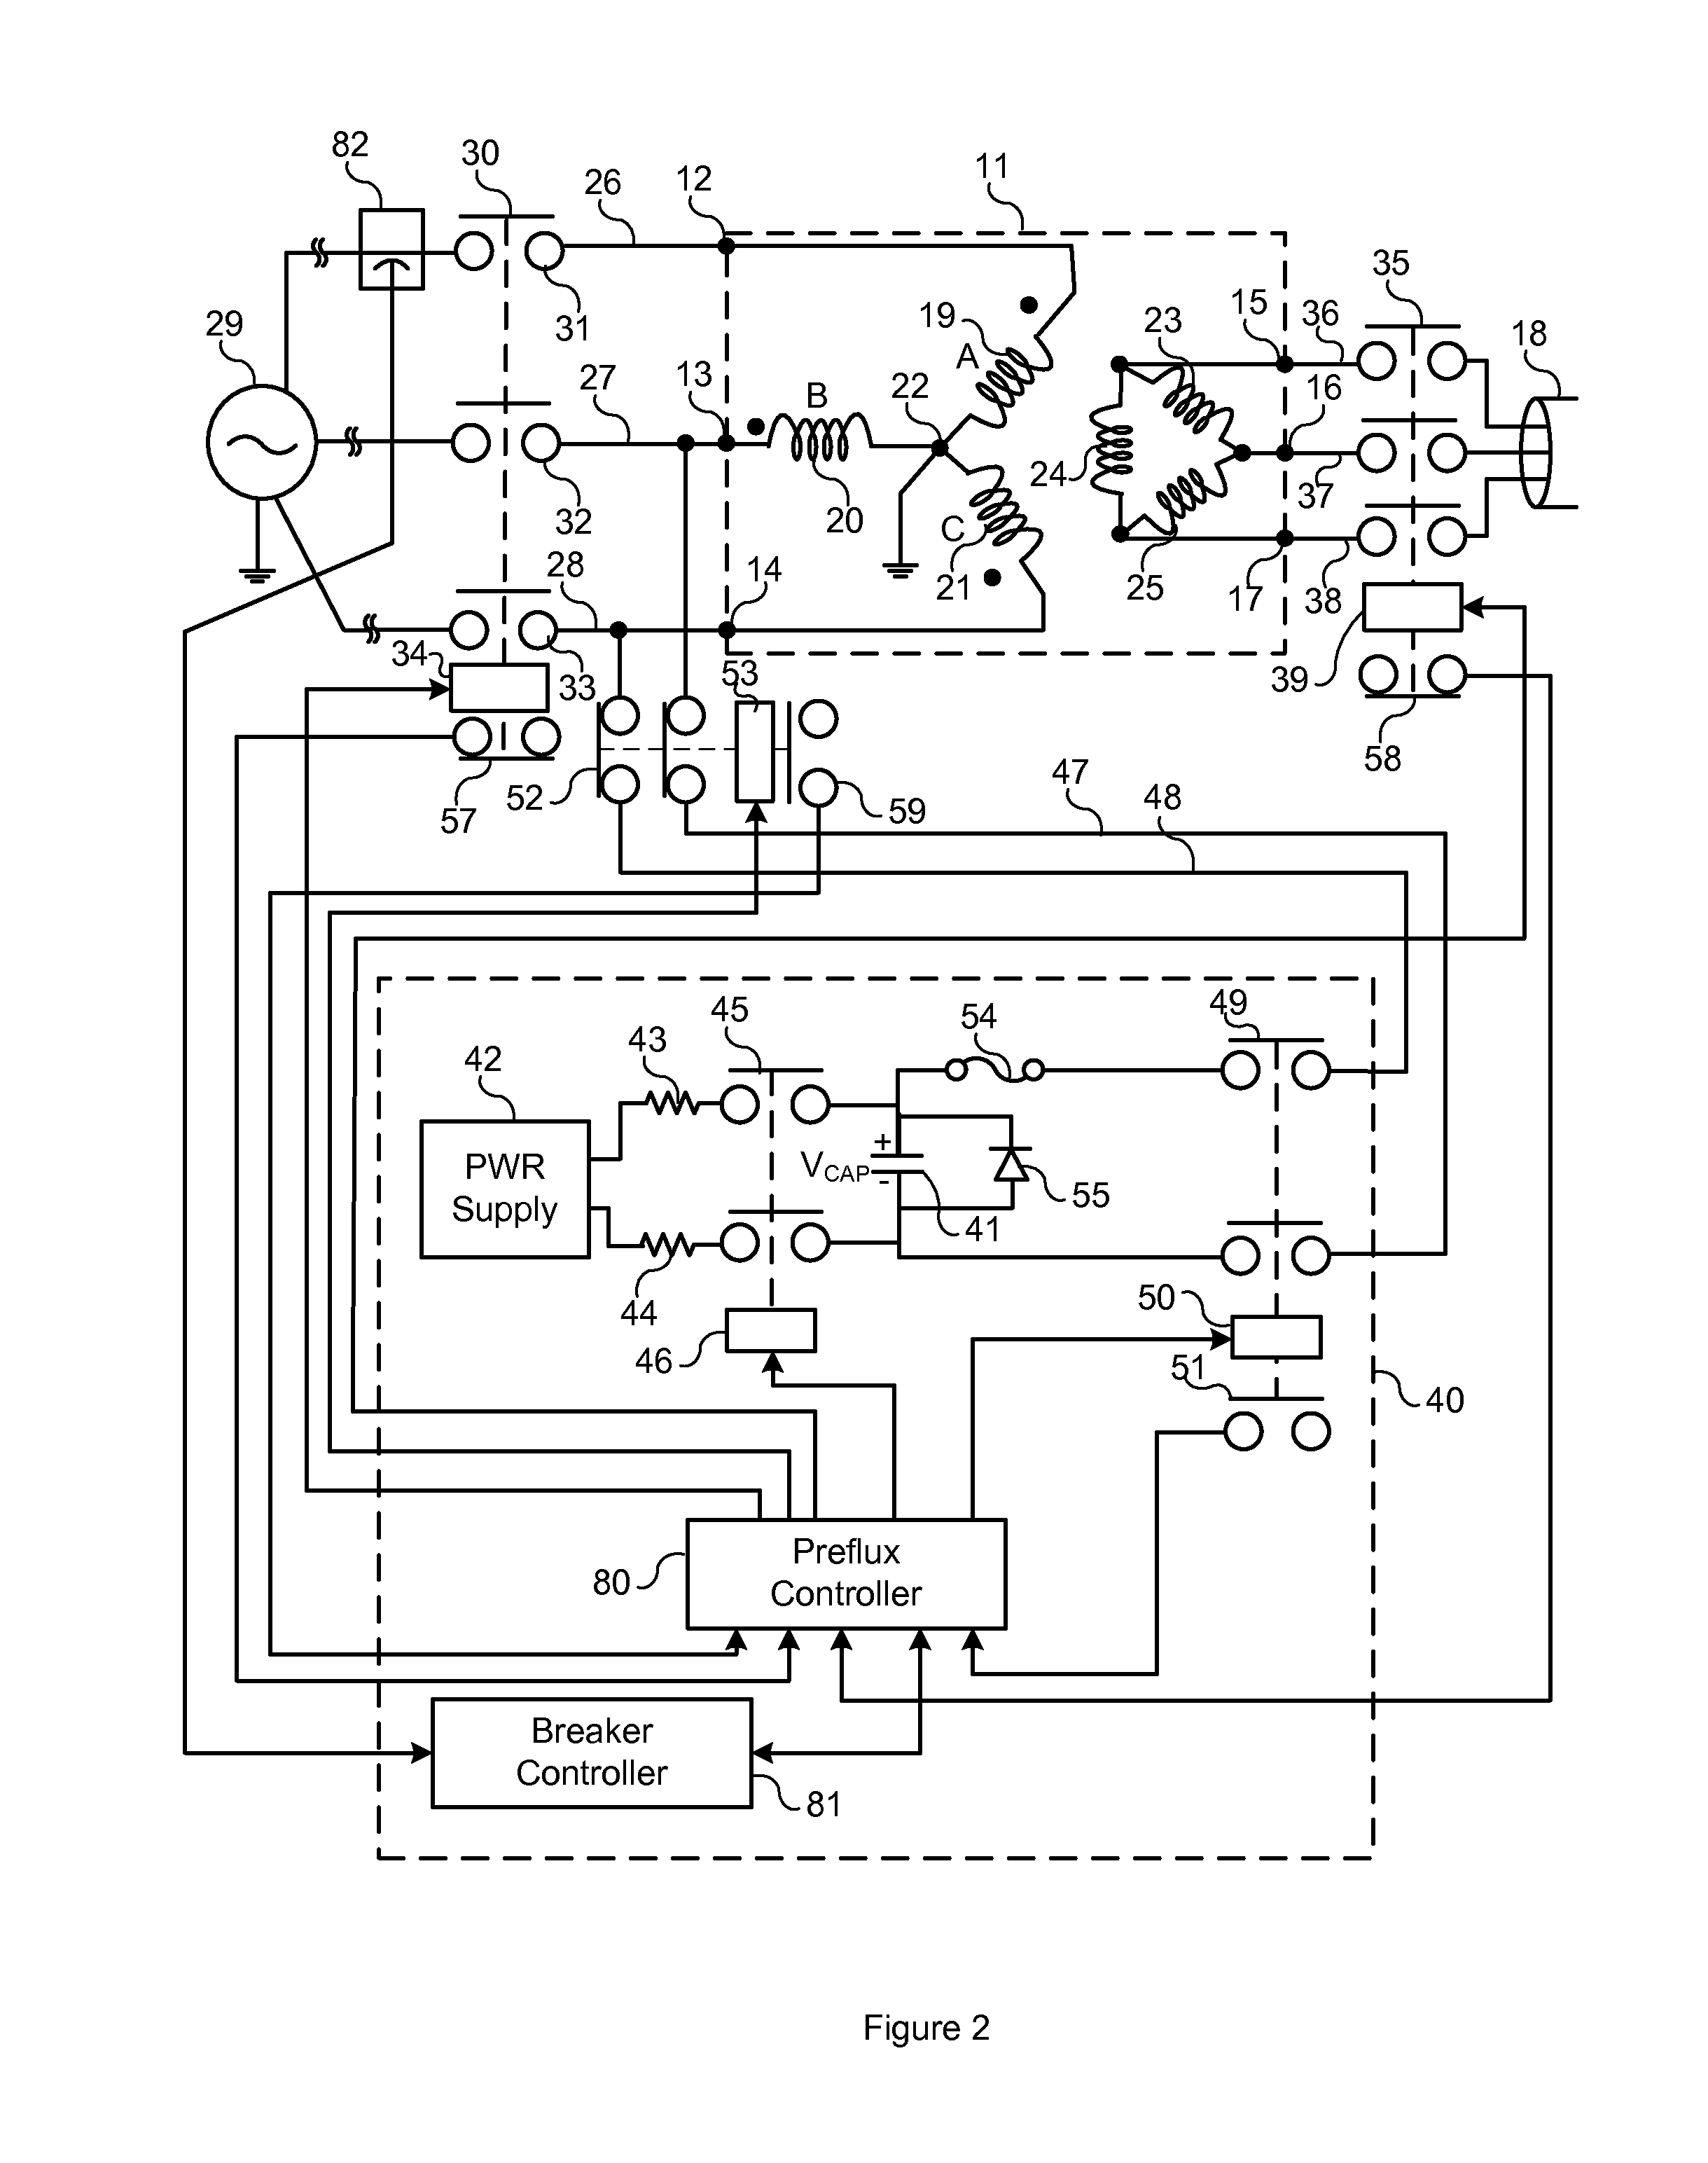 System, apparatus, and method for reducing inrush current in a three-phase transformer